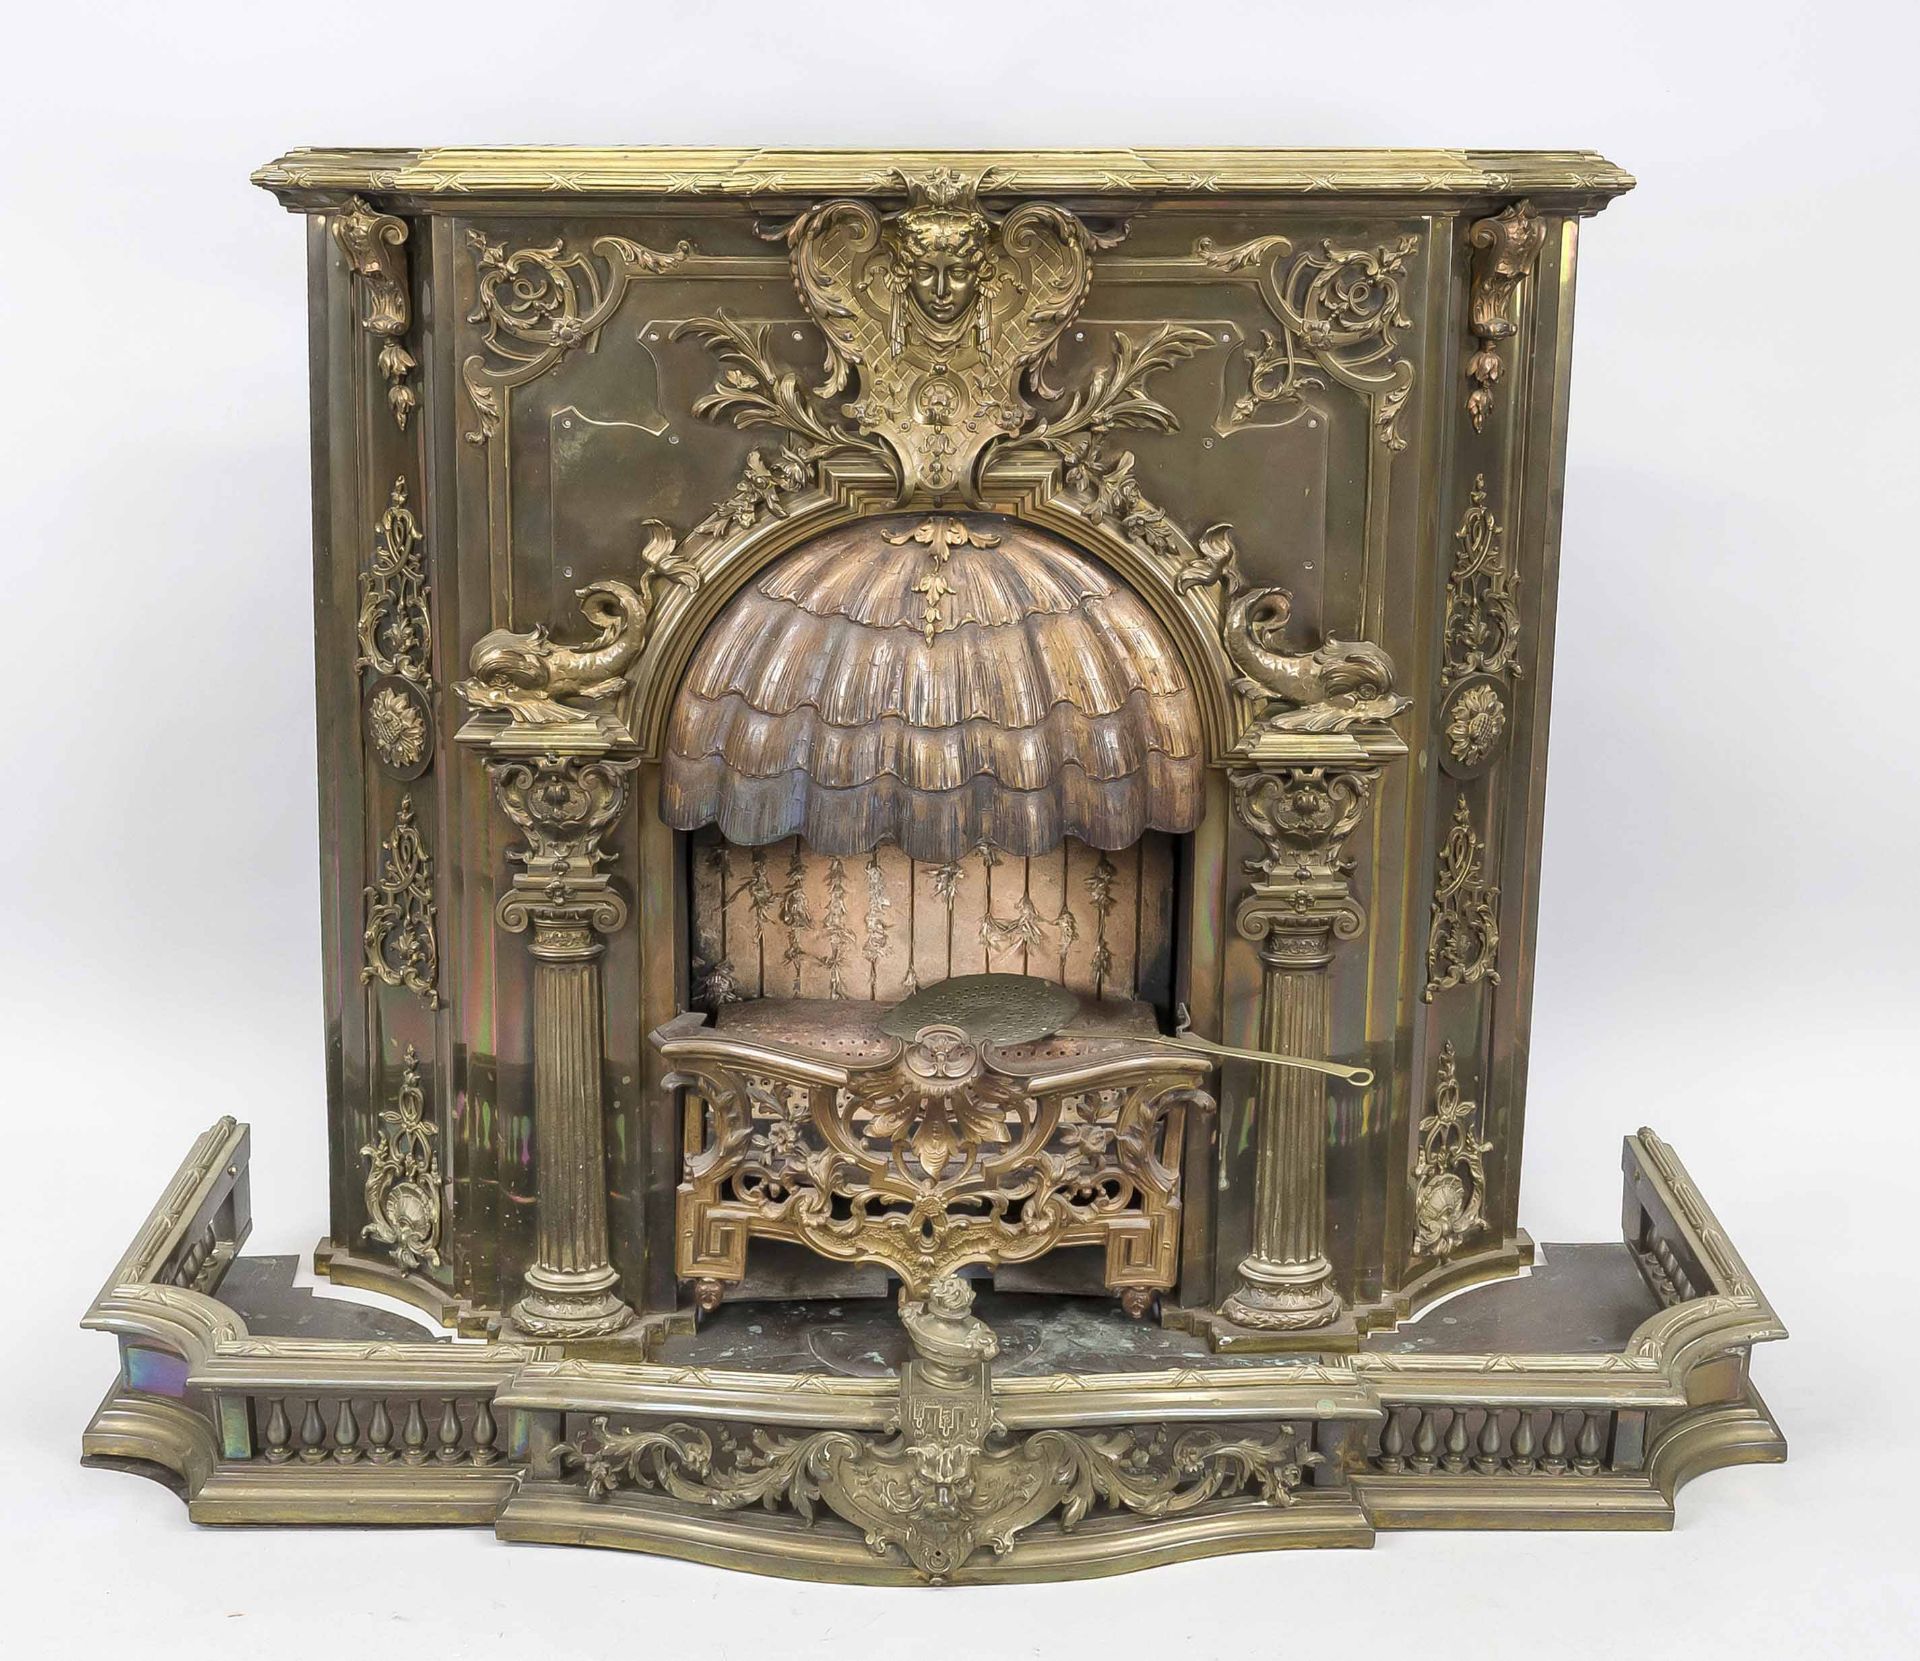 Spirit or gas fireplace?, late 19th century, brass, bronze and iron. Lavishly decorated and